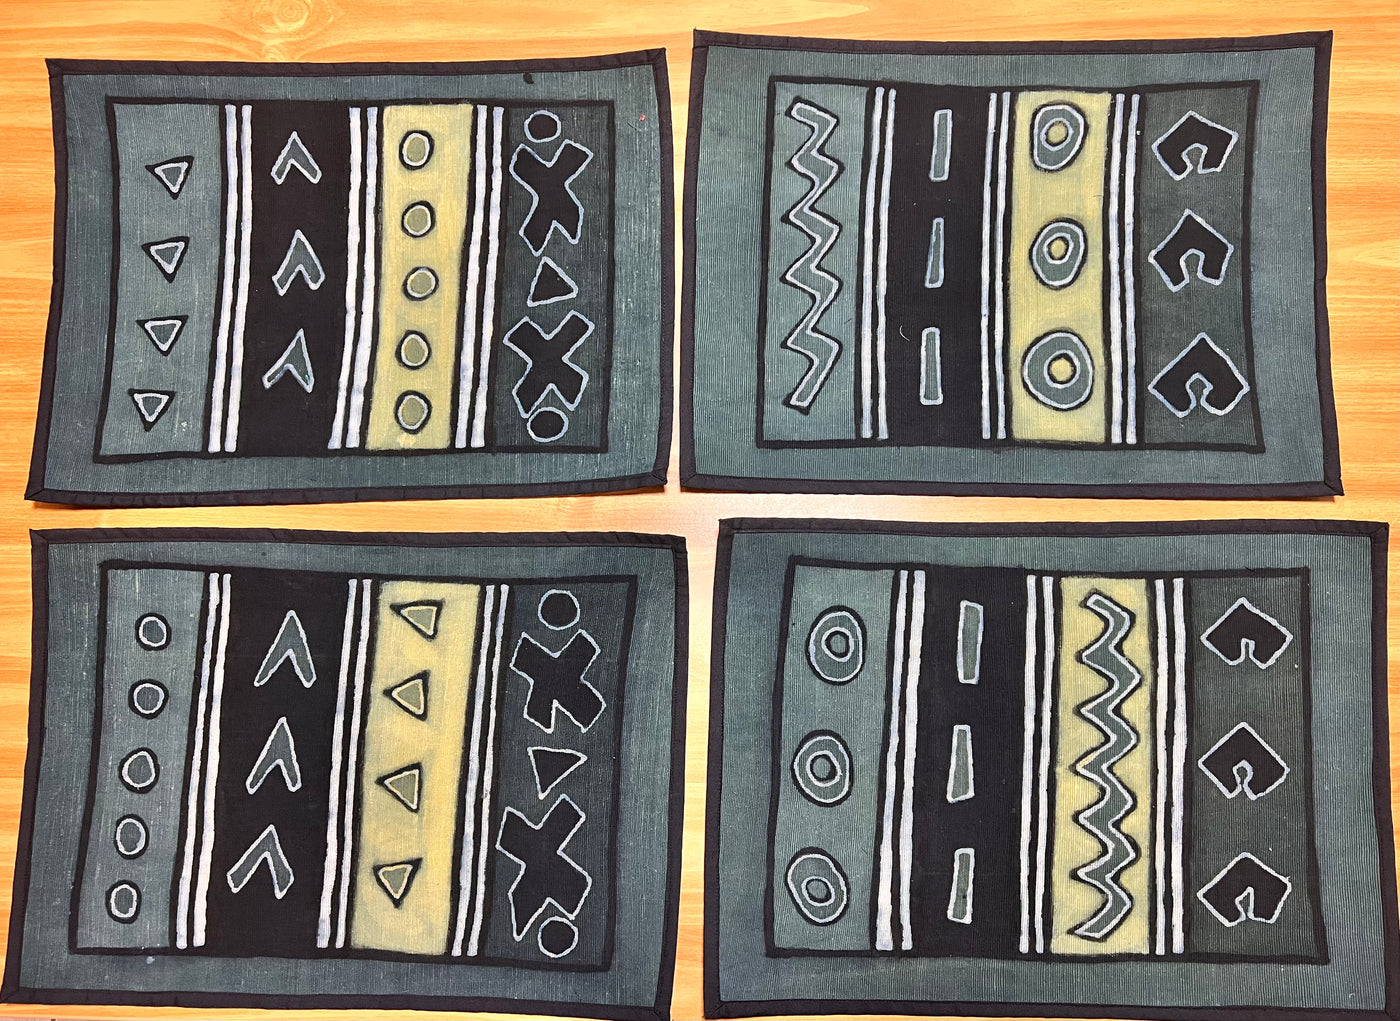 "Tradition Meets Table: Authentic Mudcloth Placemats from Mali"